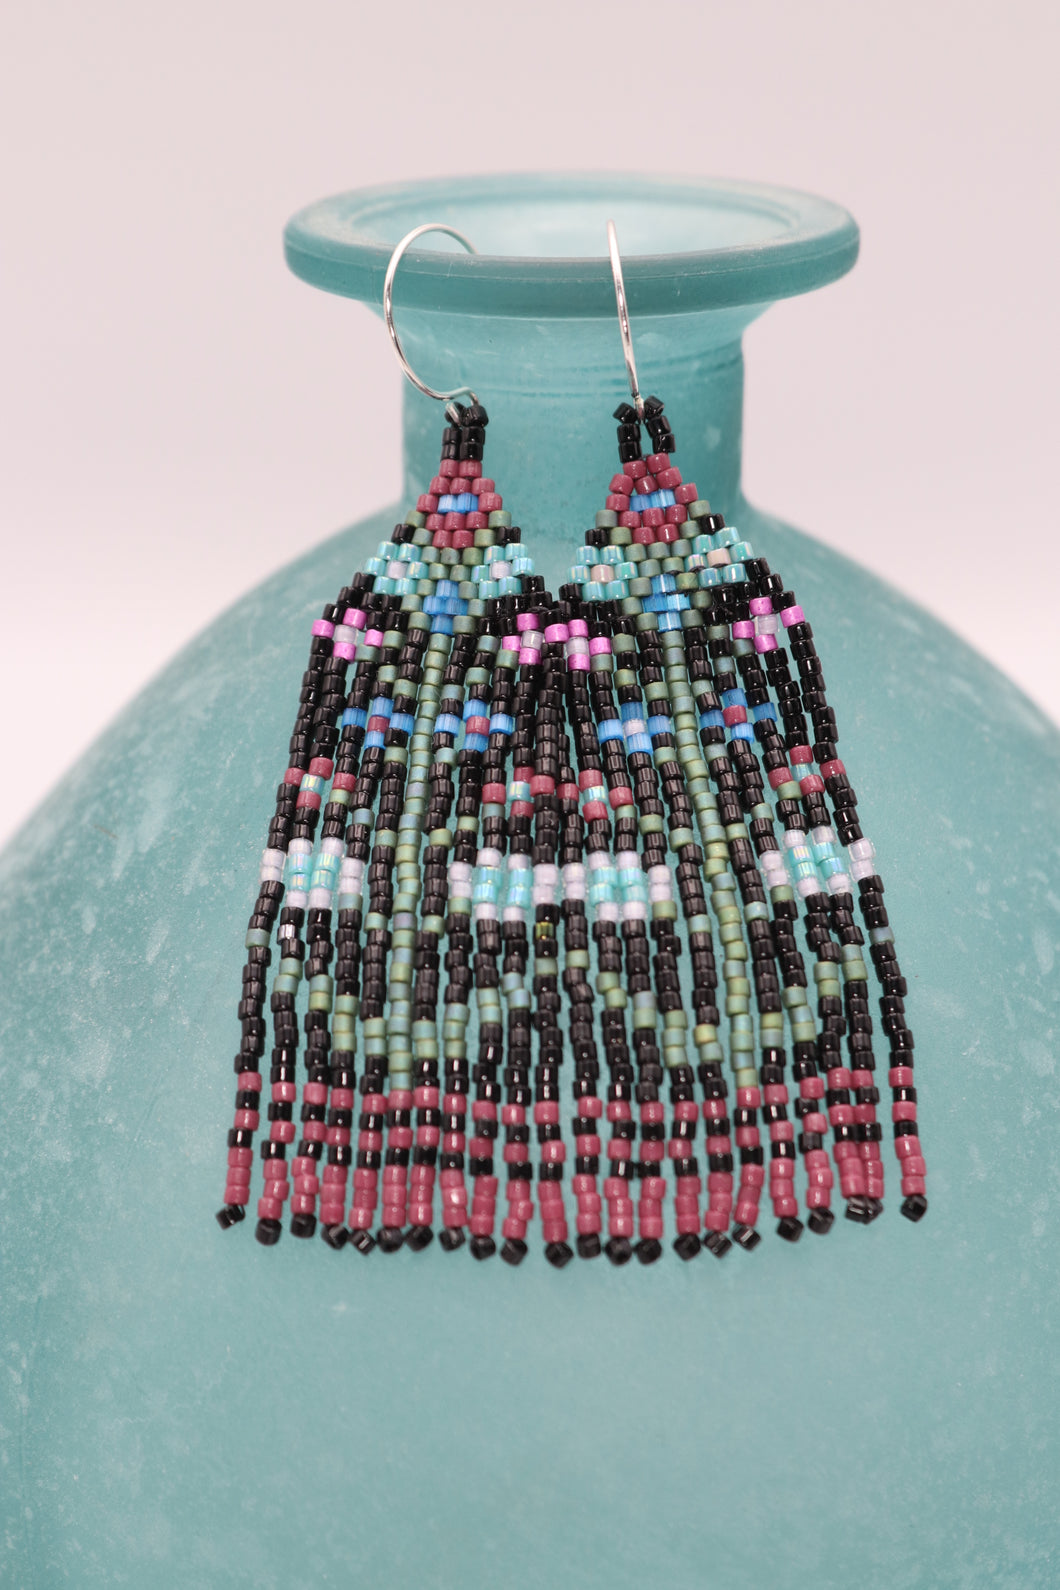 3 inch long by .75 inch wide seed bead fringe earrings. Handmade. Black base with plum, aqua, pink, and lavender floral pattern with green leaves and stems